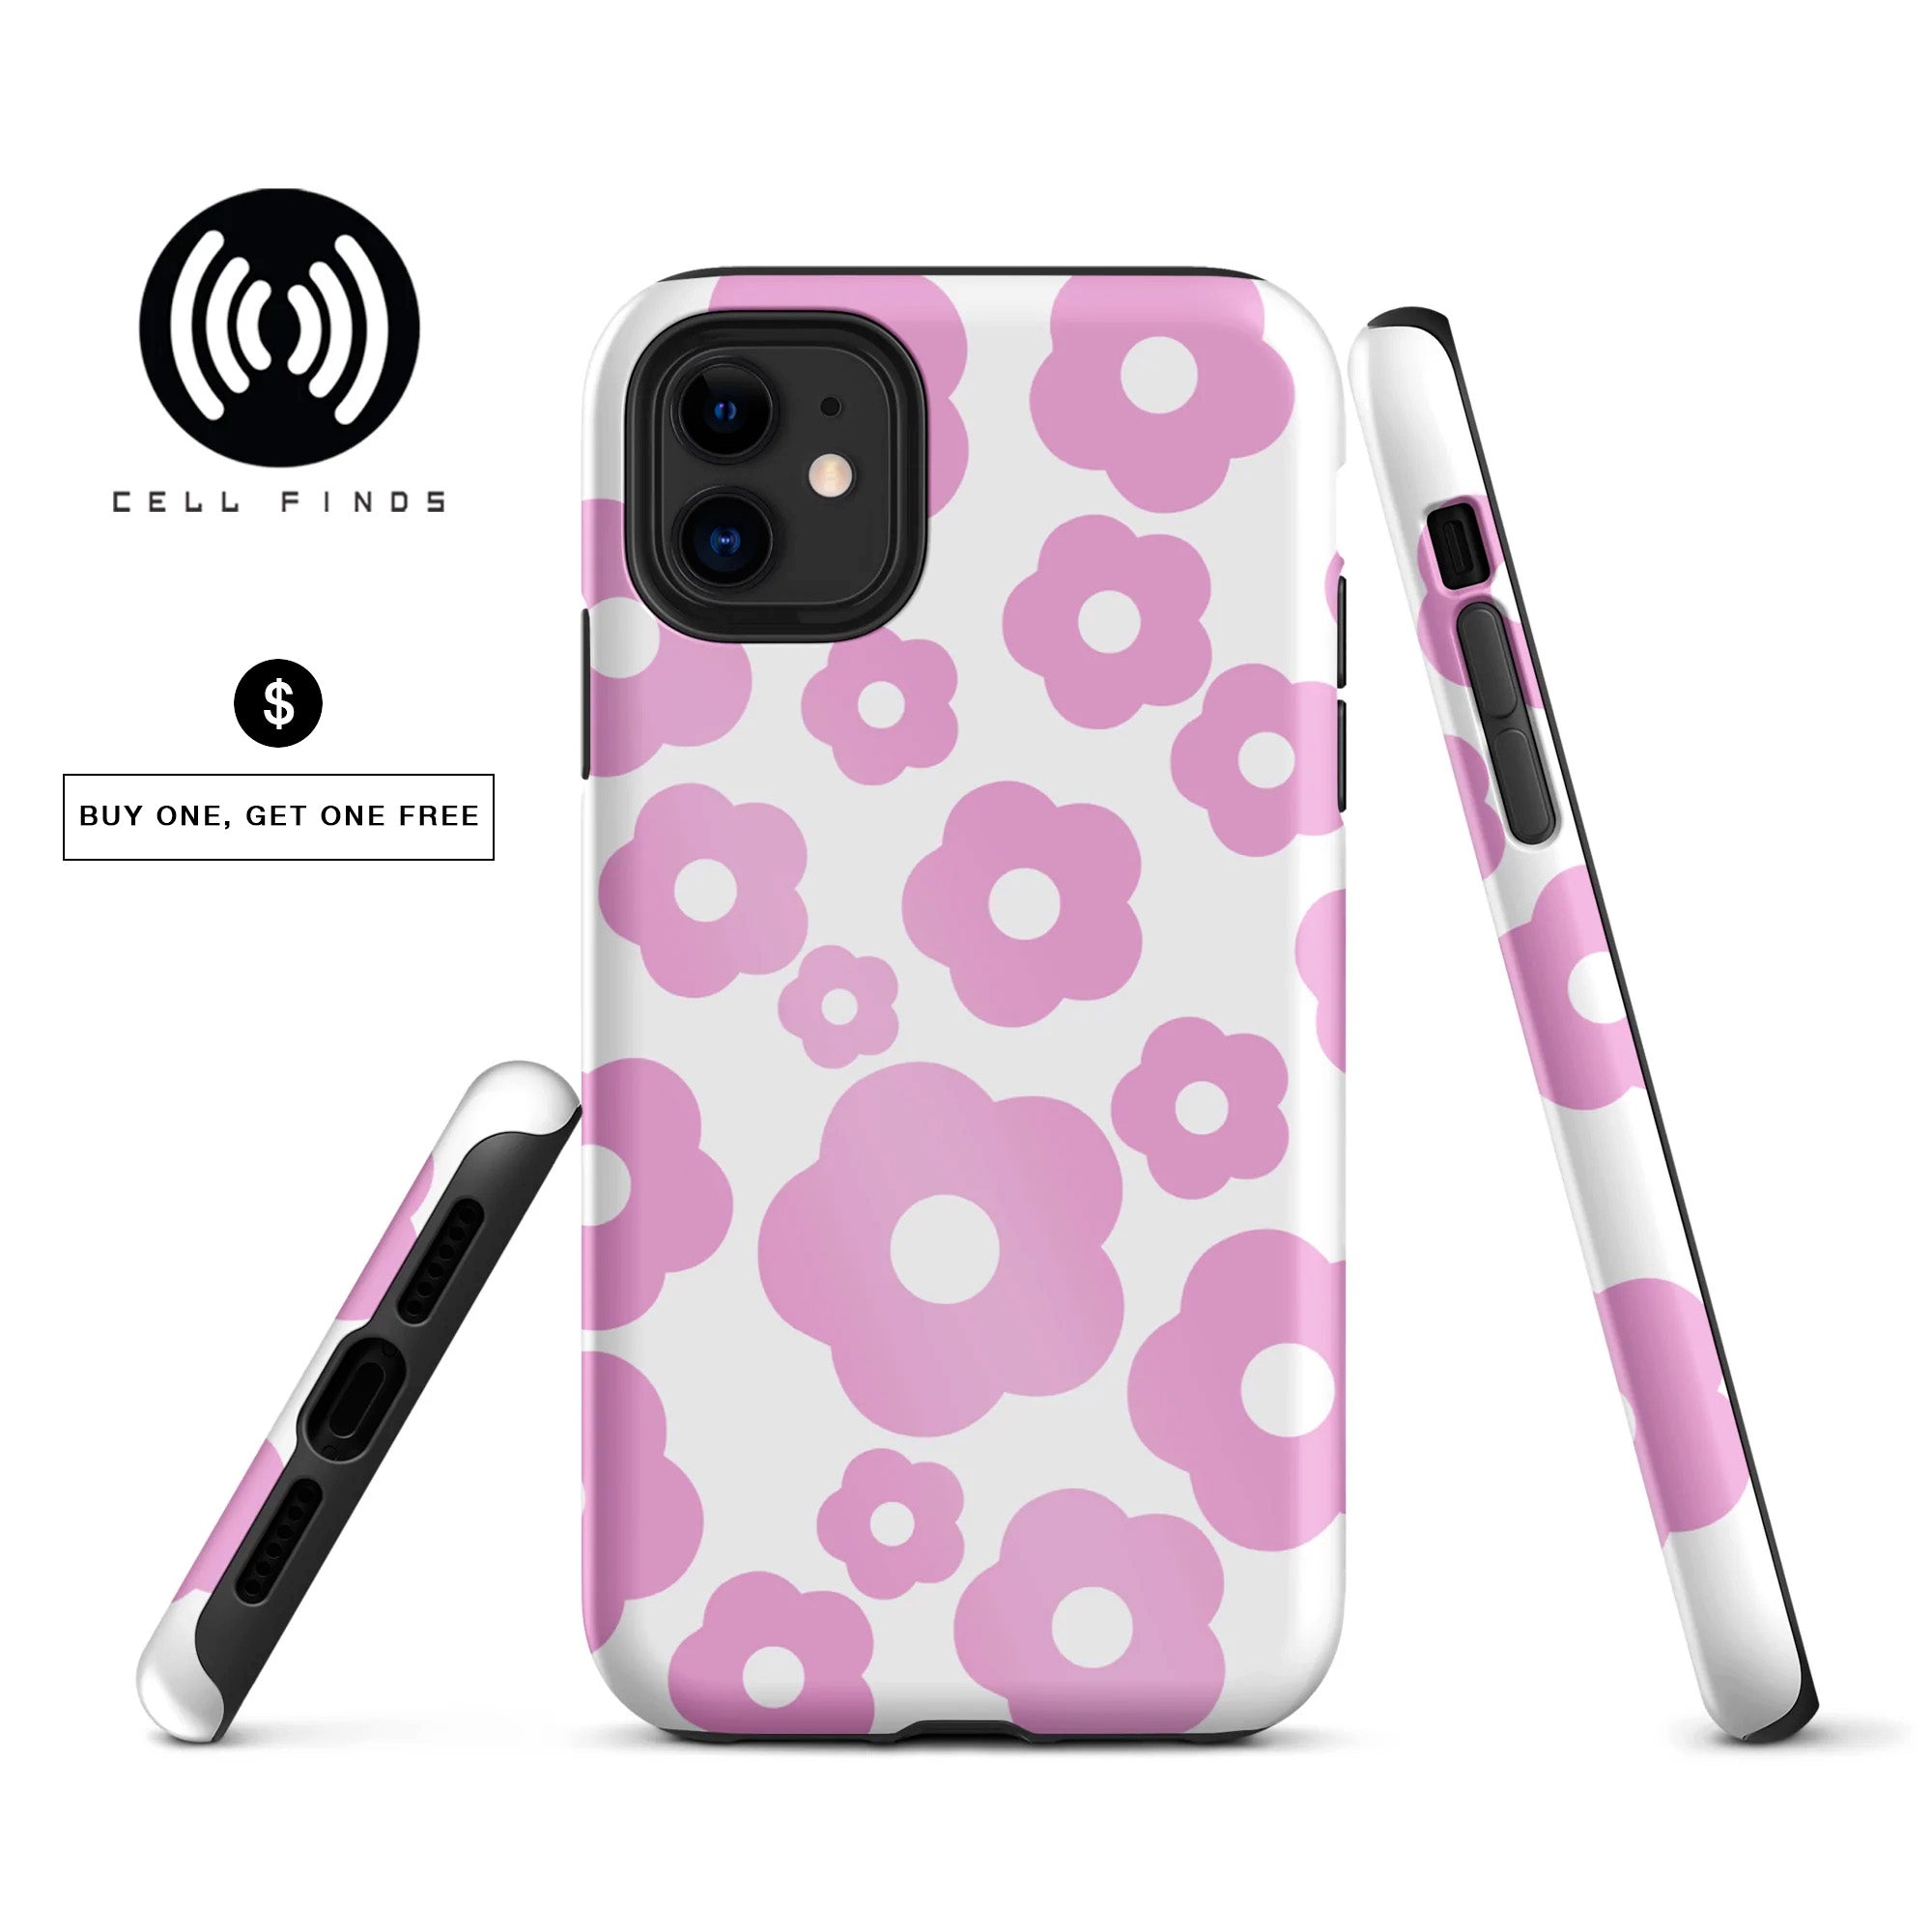 Cute Pink Flower iPhone Cases - In All Sizes